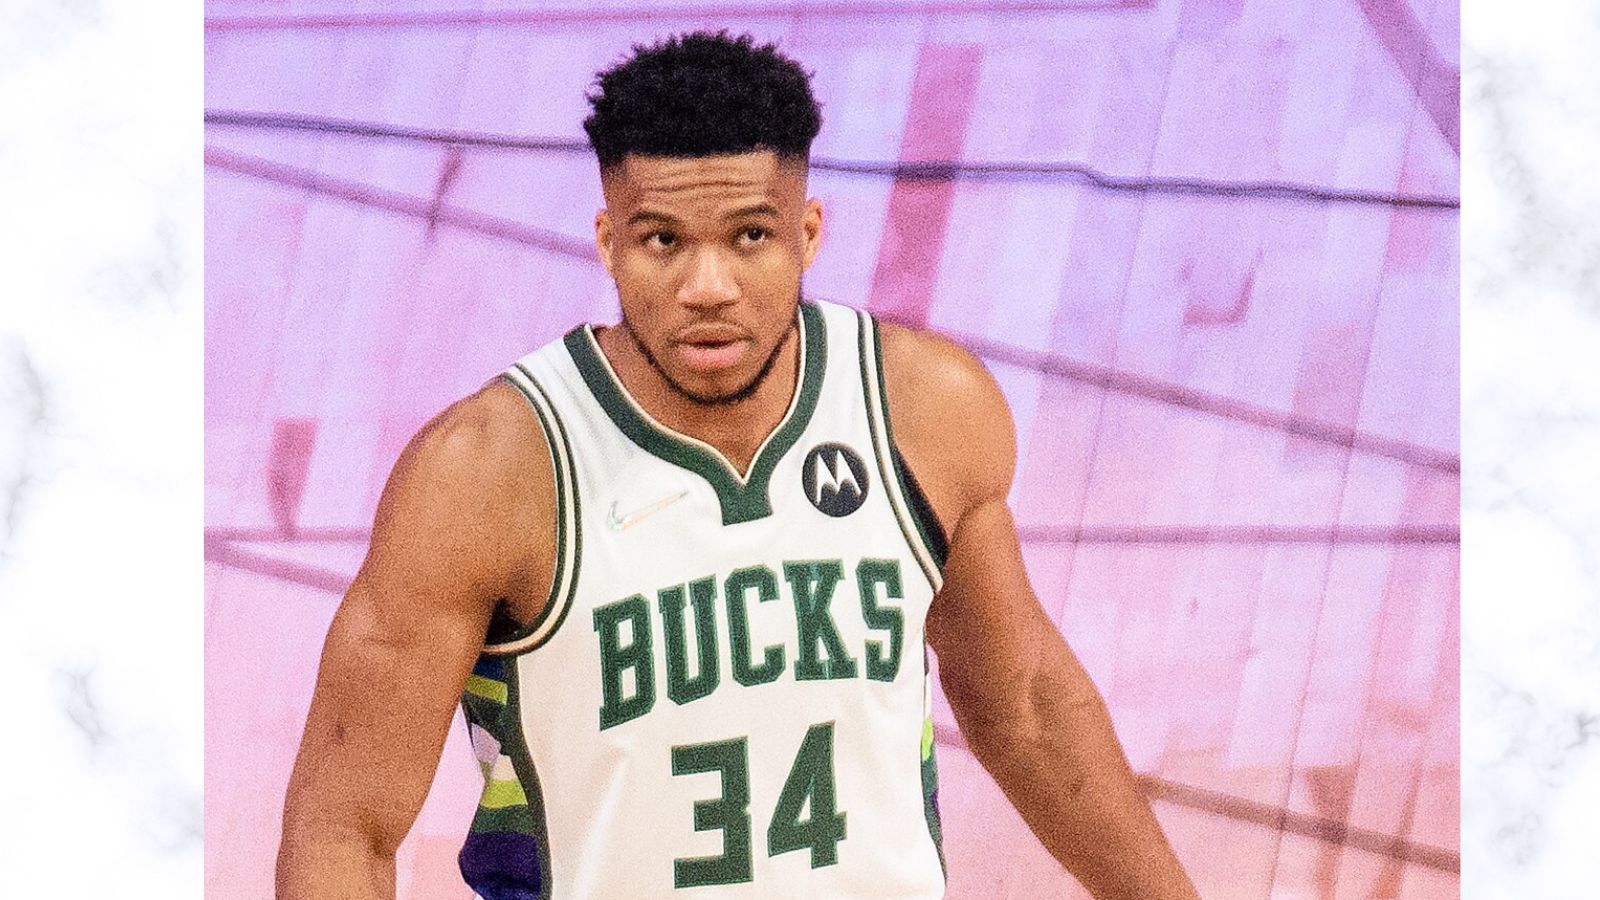 Giannis Antetokounmpo Biography: Age, Height, Birthday, Career, Family, Personal Life, Net Worth